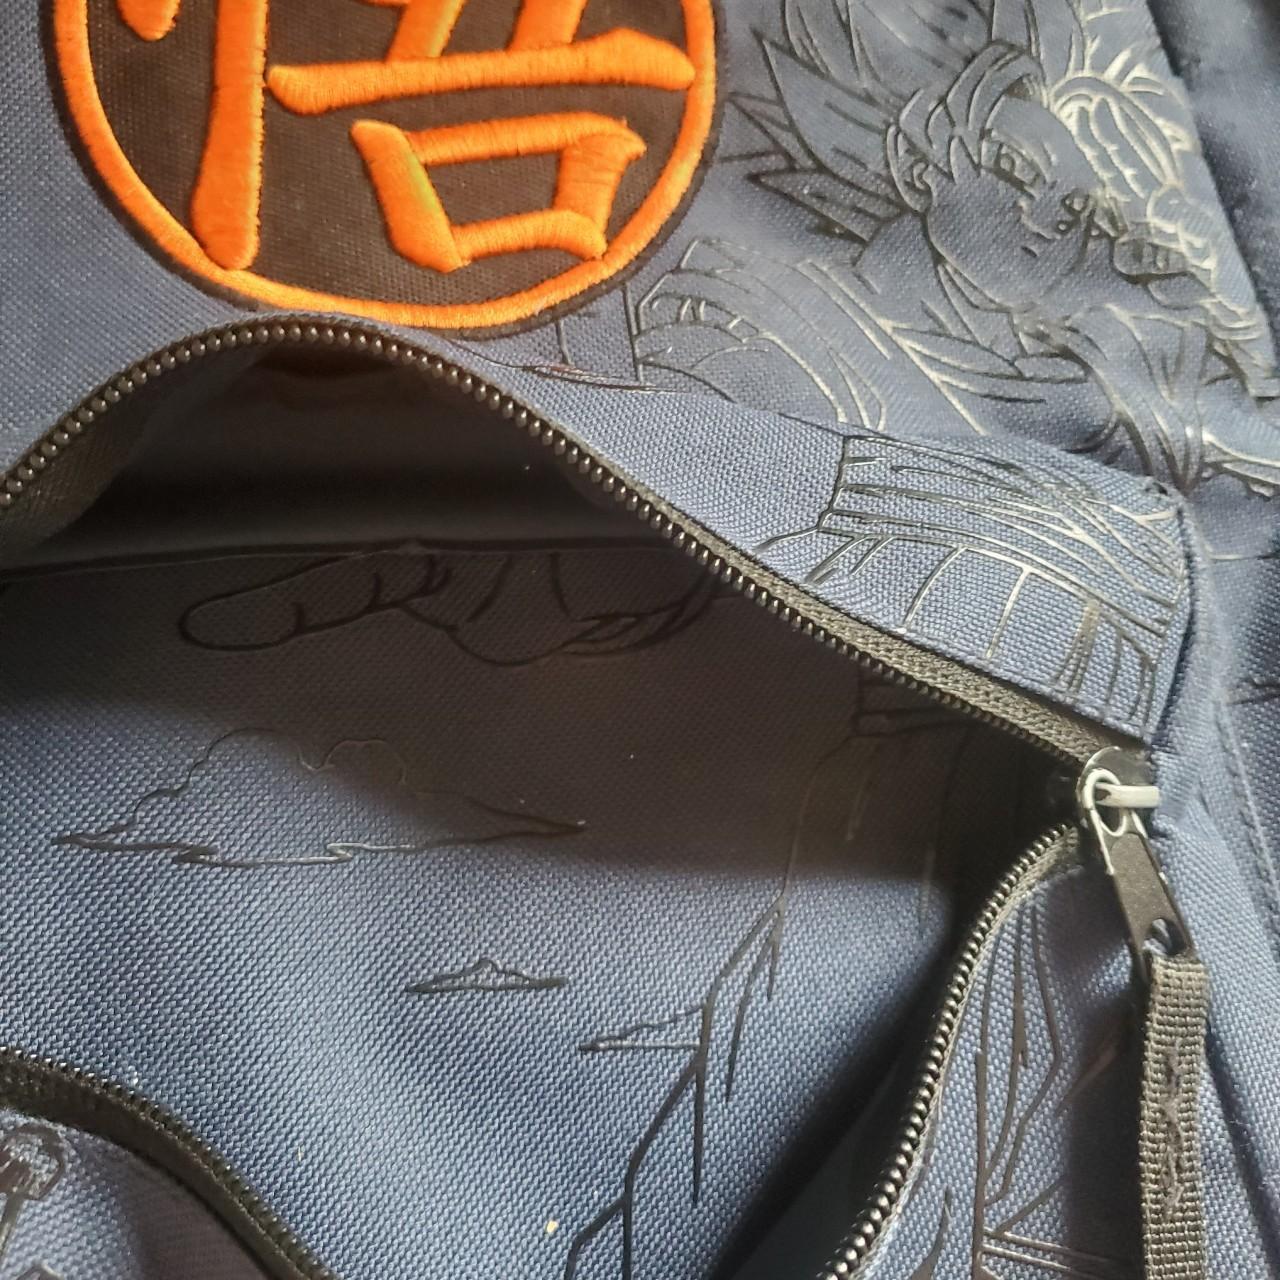 DBZ Backpack used, cleaned, stitching almost - Depop